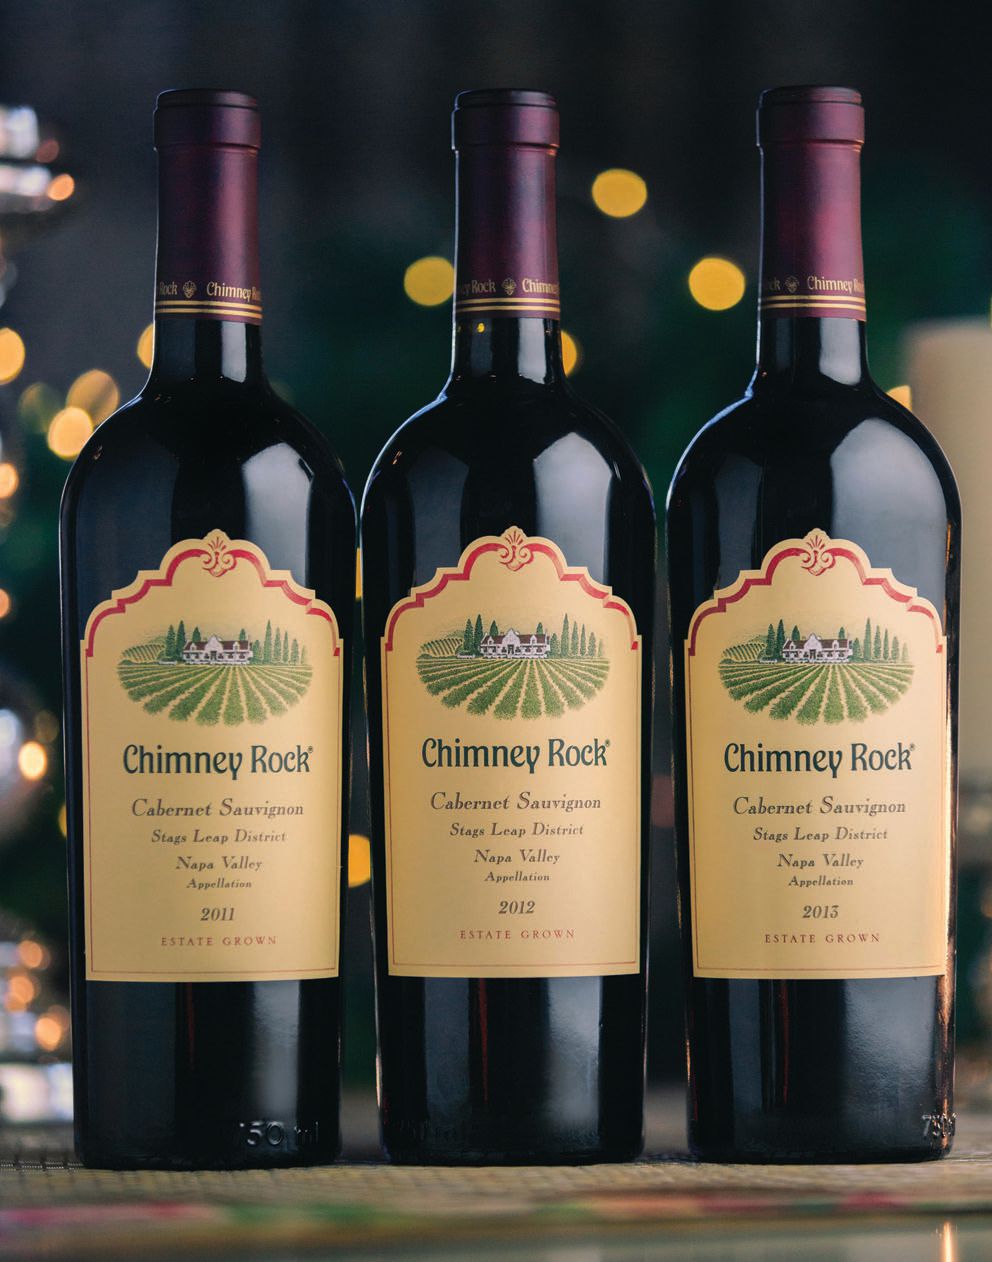 Chimney Rock’s estate cabernet sauvignon is one of the finest in the region PHOTO BY: BOTTLE BRANDING